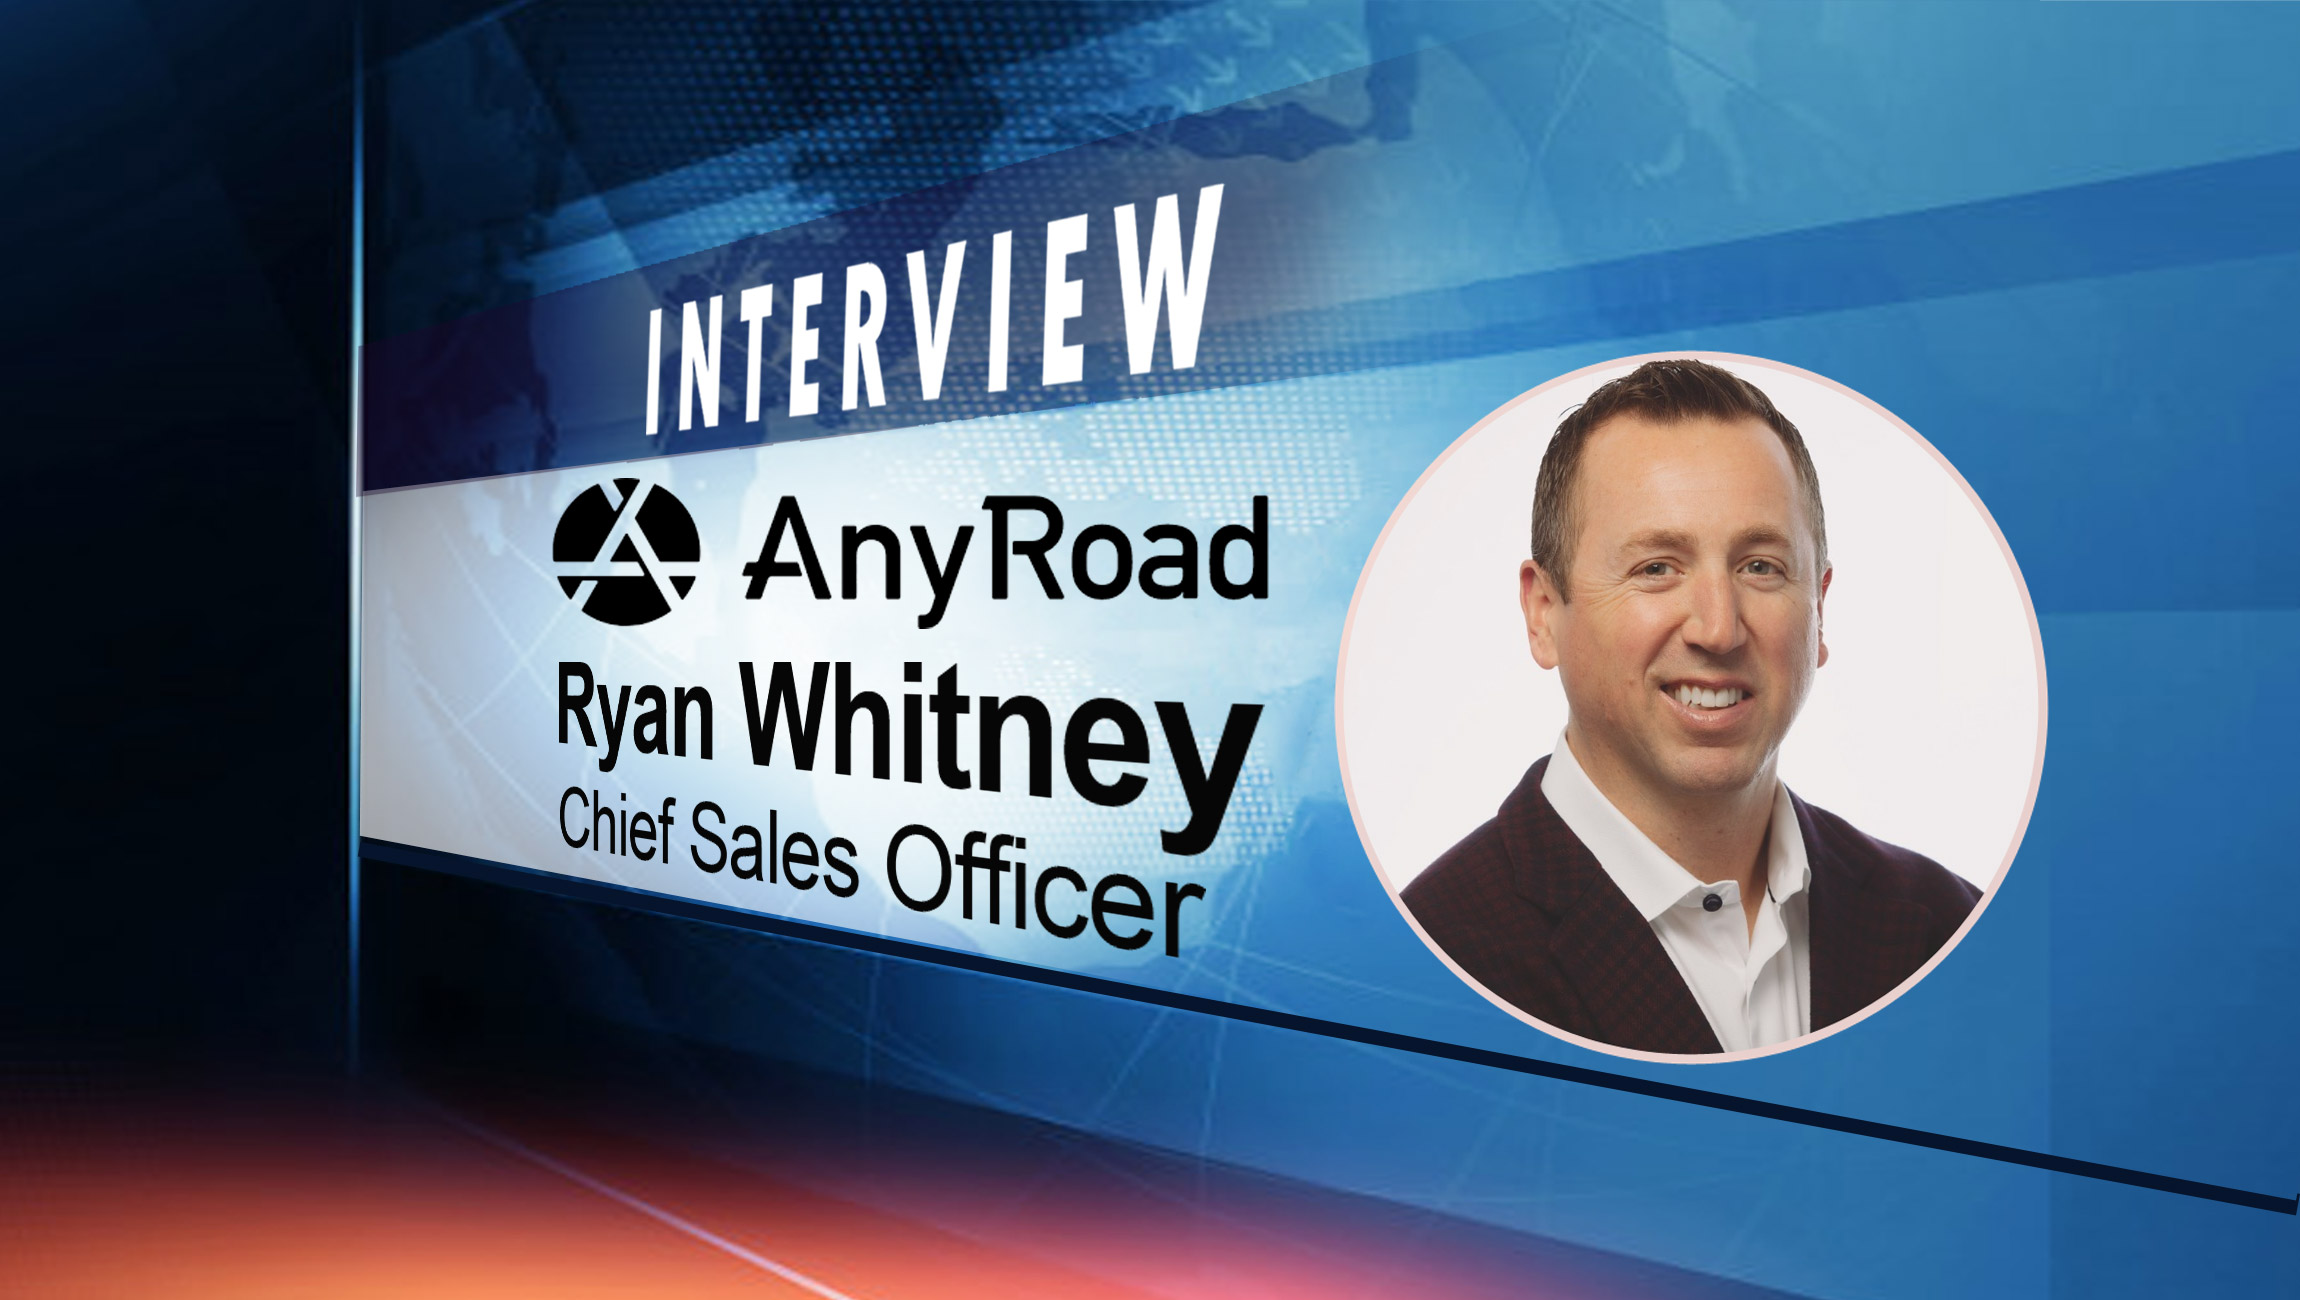 SalesTechStar Interview with Ryan Whitney, Chief Sales Officer at AnyRoad